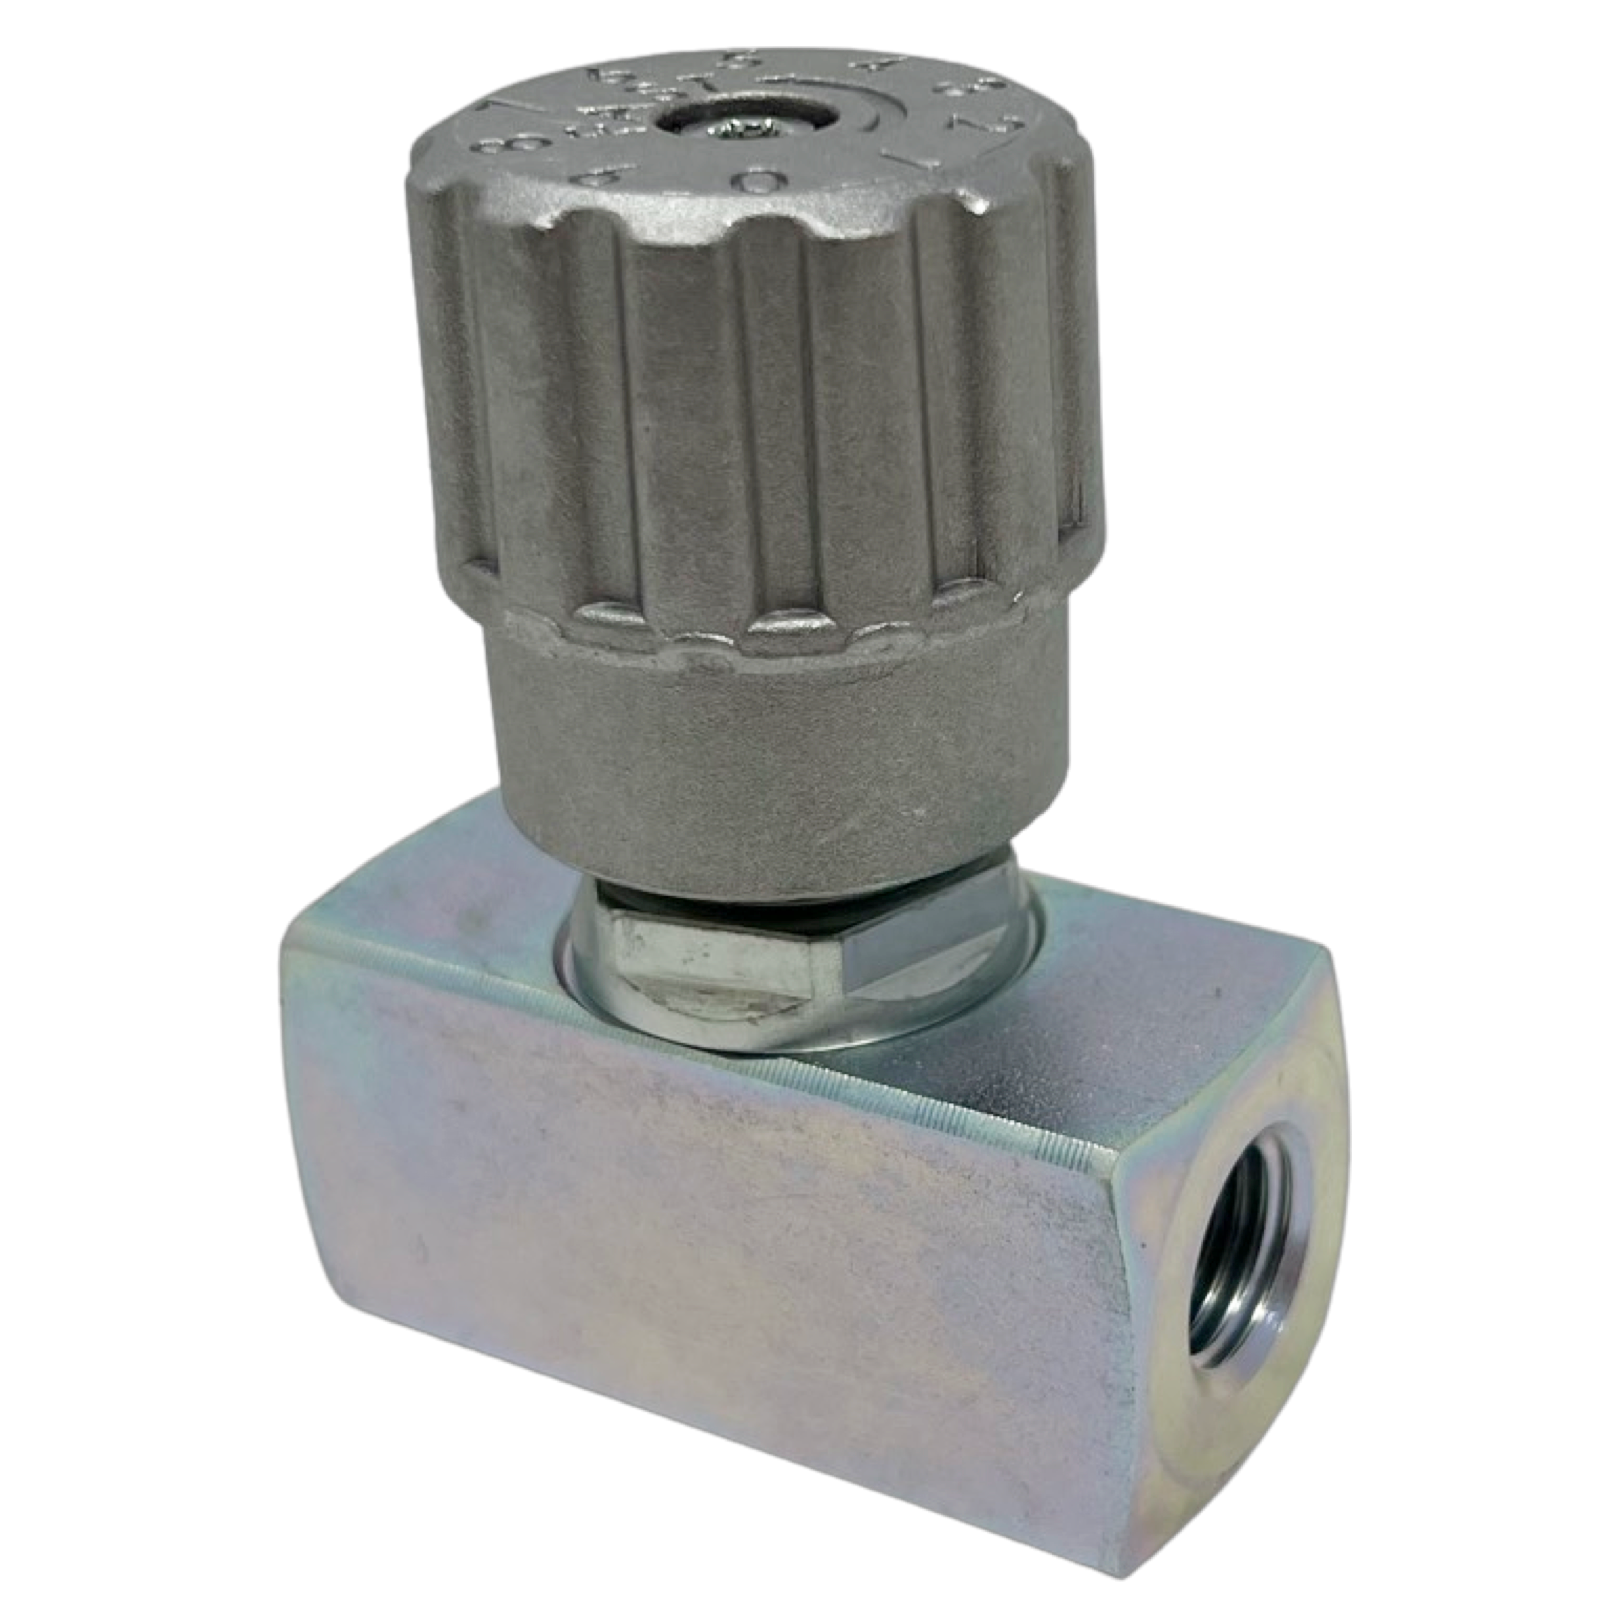 NN1/2-1 : AFP Needle Valve, 1/2" NPT, 5700psi and 13GPM Flow Rated, Steel